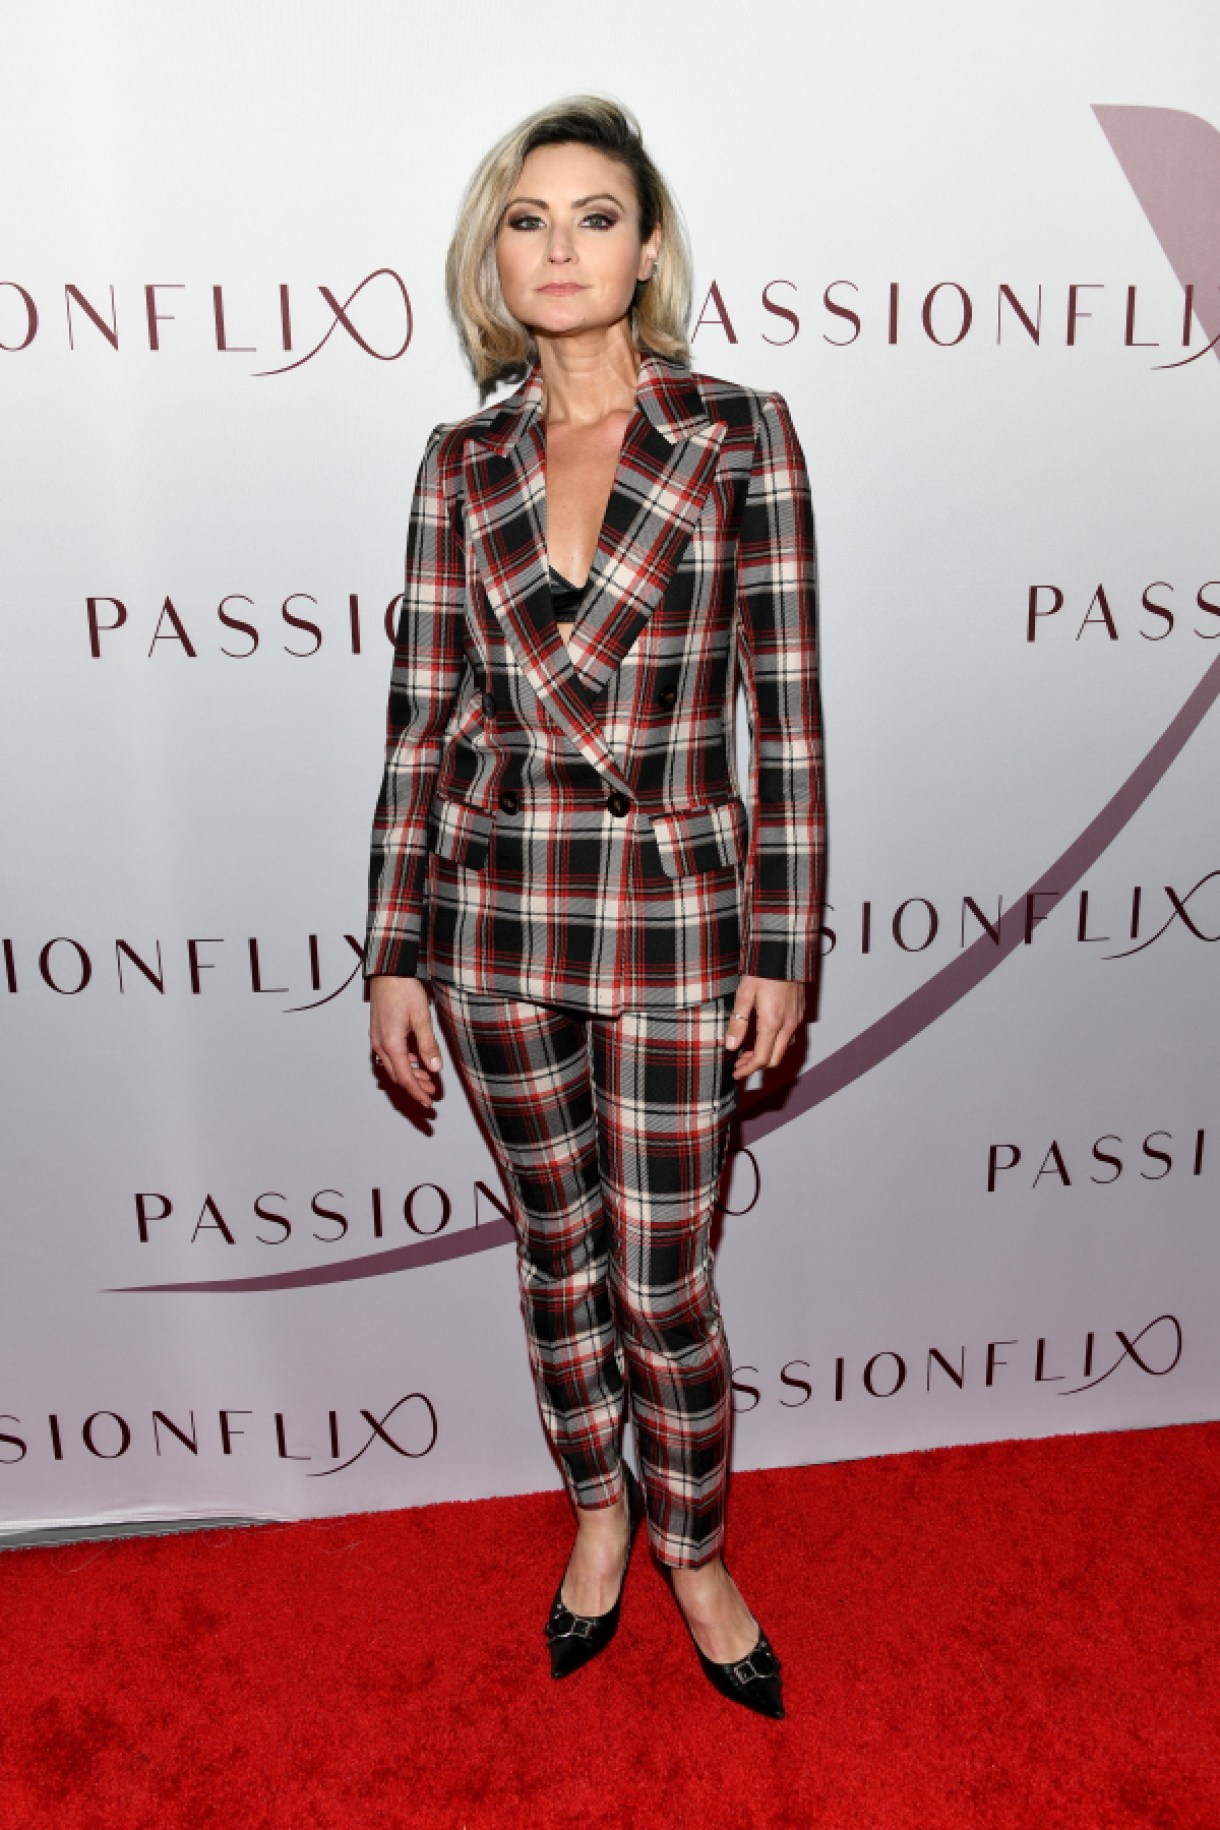 CULVER CITY, CALIFORNIA - FEBRUARY 12: Haviland Stillwell attends Passionflix's "The Will" Los Angeles Premiere on February 12, 2020 in Culver City, California. (Photo by Araya Doheny/Getty Images for PASSIONFLIX)